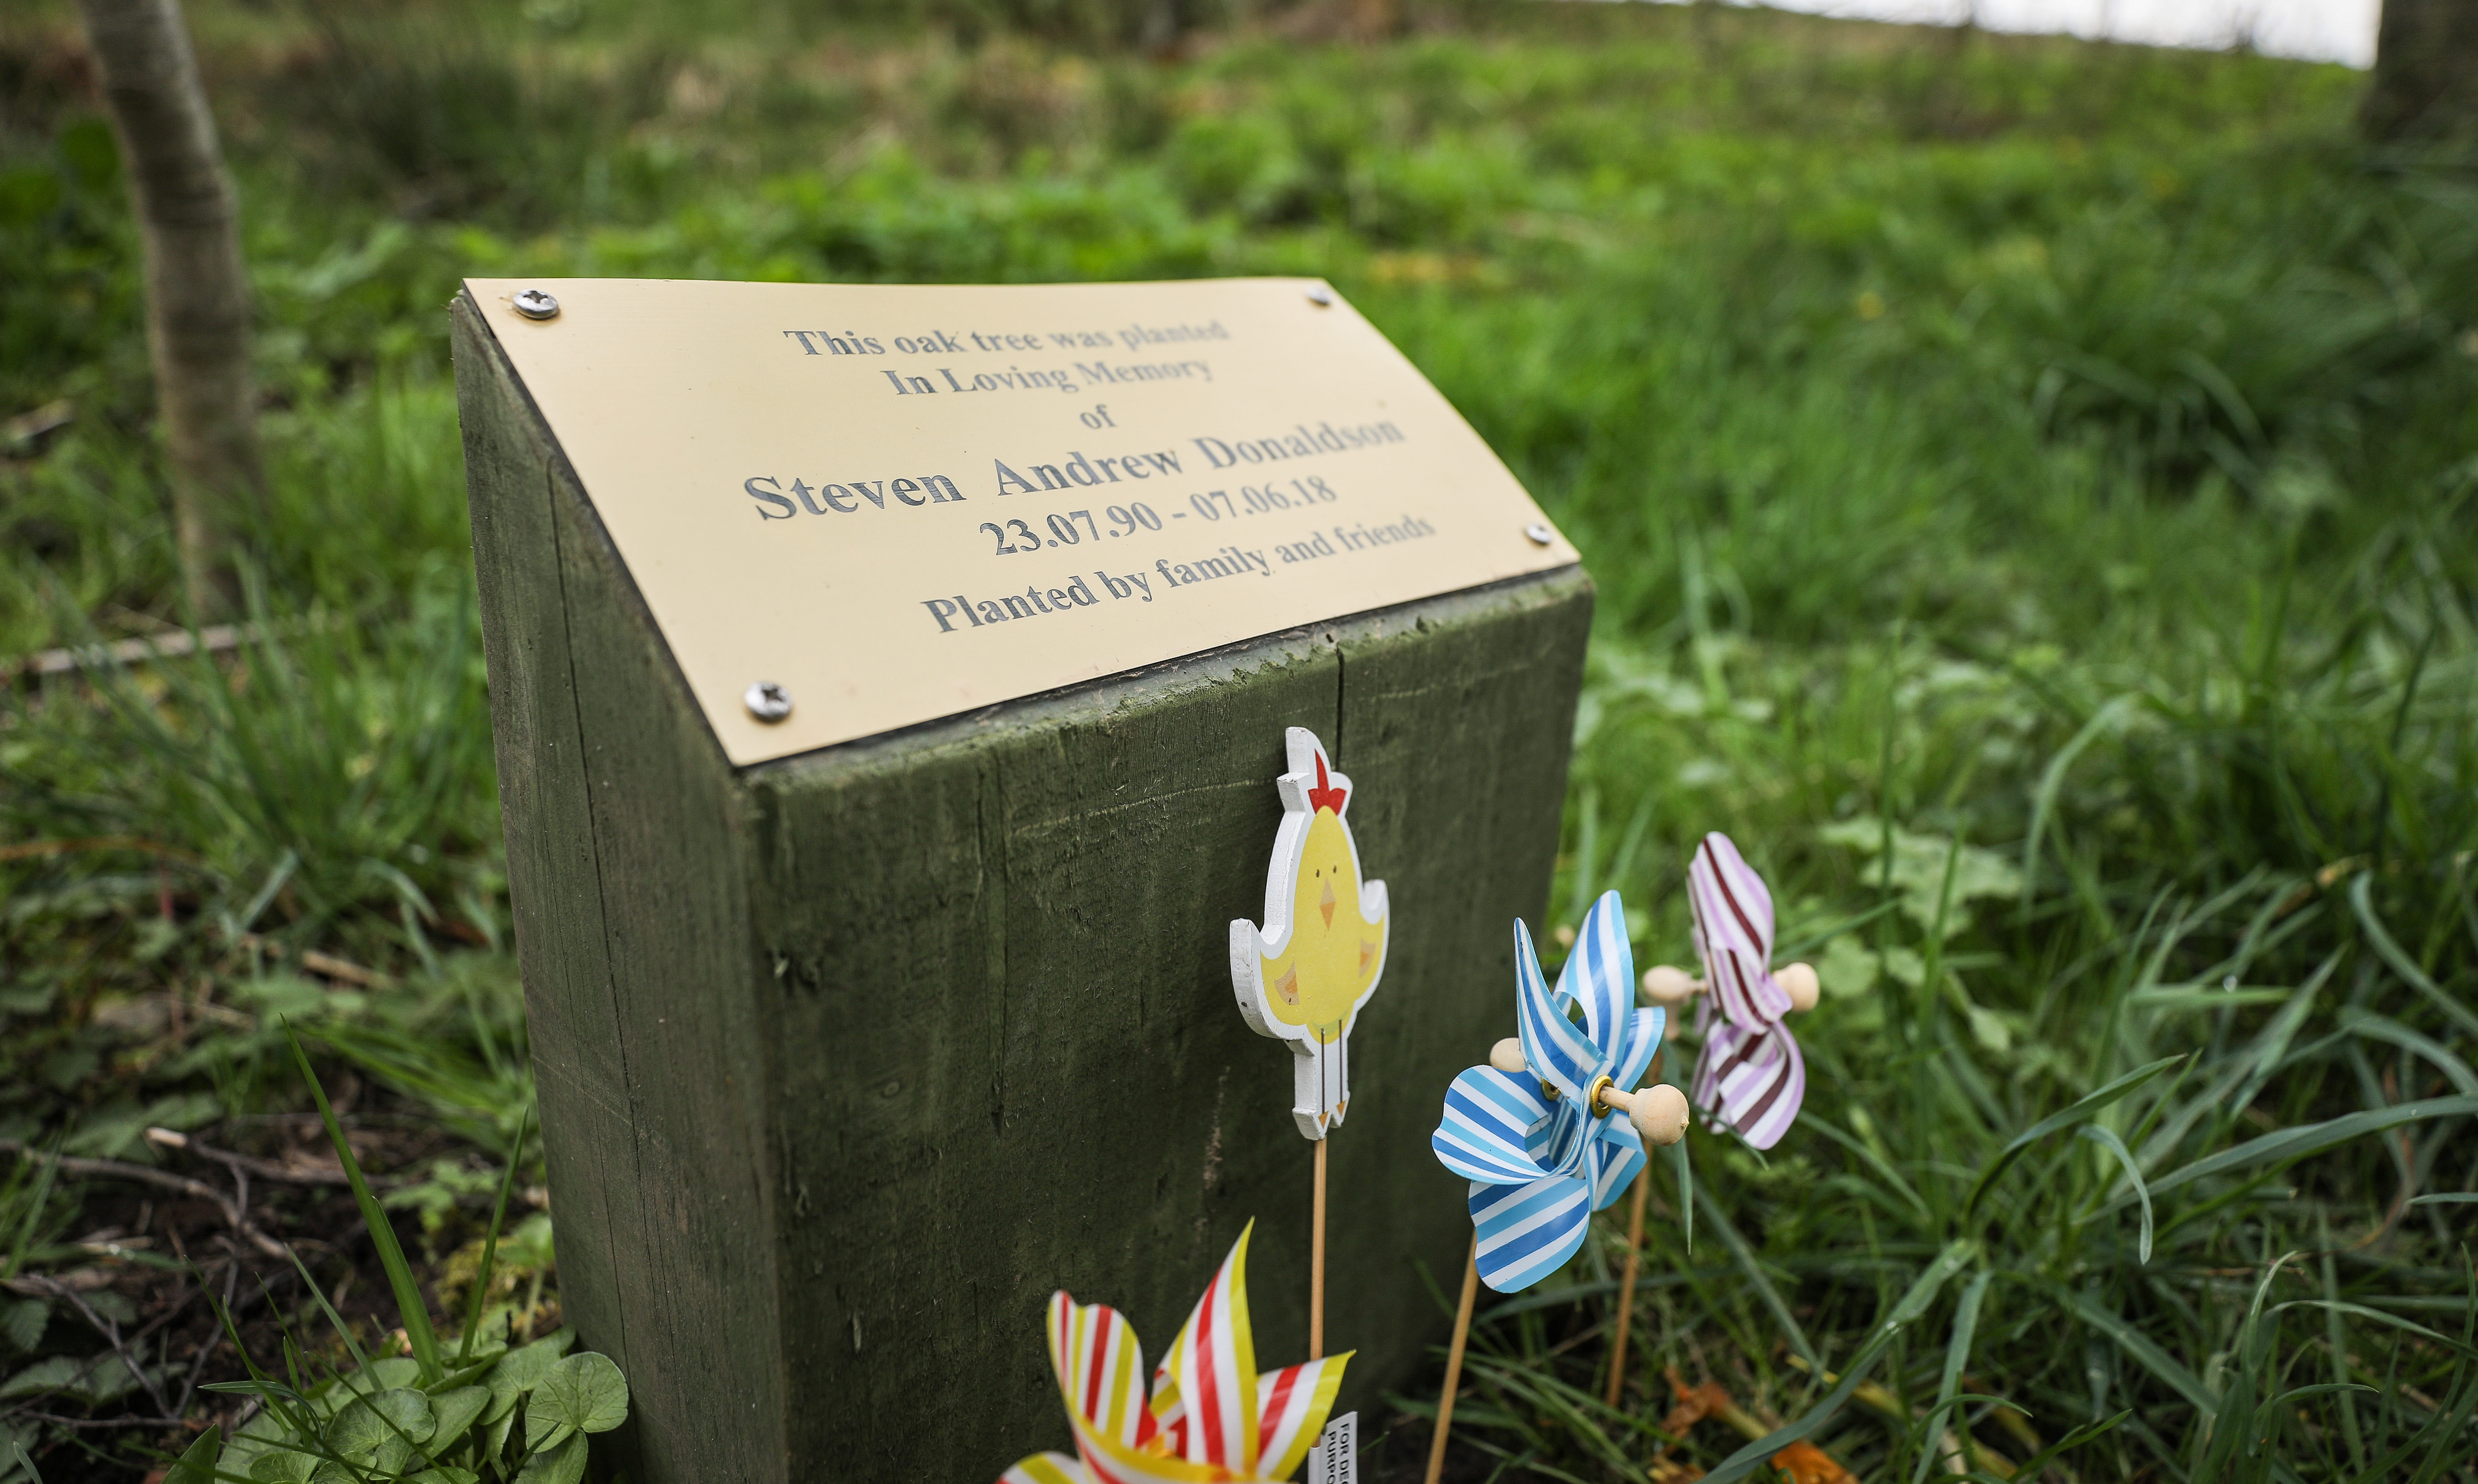 A memorial plaque at a tree planted in memory of Steven Donaldson at Loch of Kinnordy, near Kirriemuir.